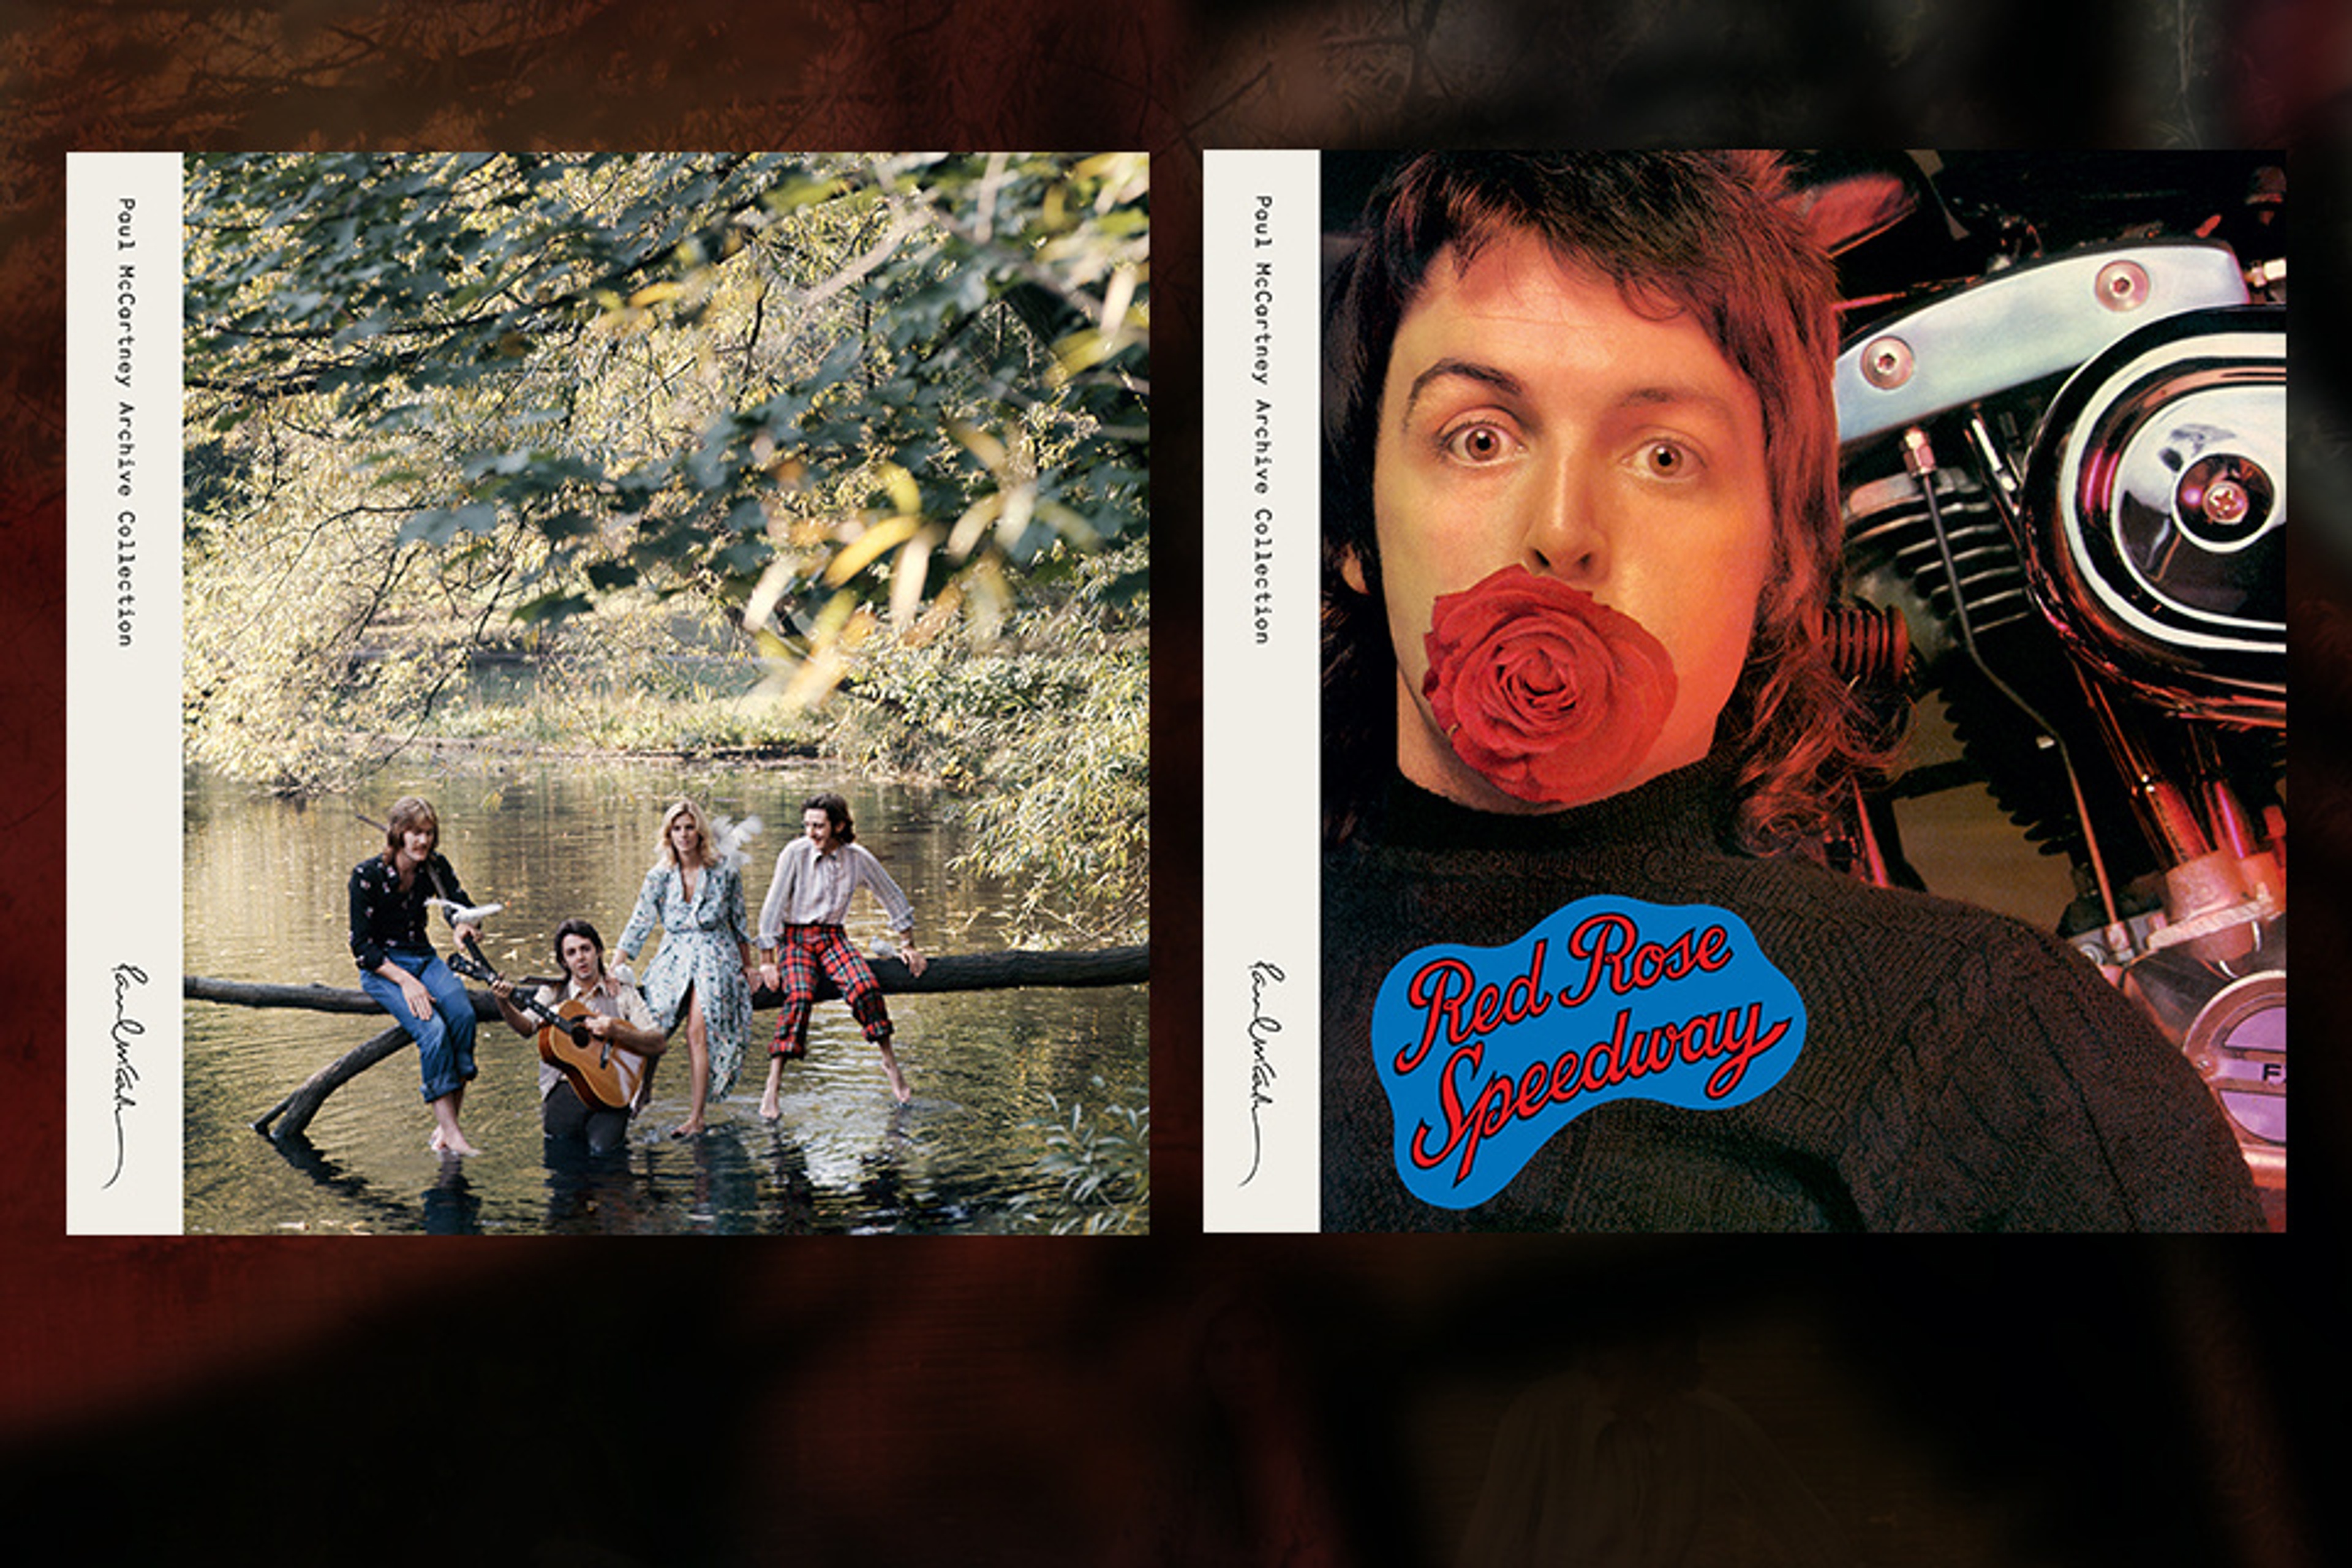 Listen to the 'Wild Life' and 'Red Rose Speedway' radio special